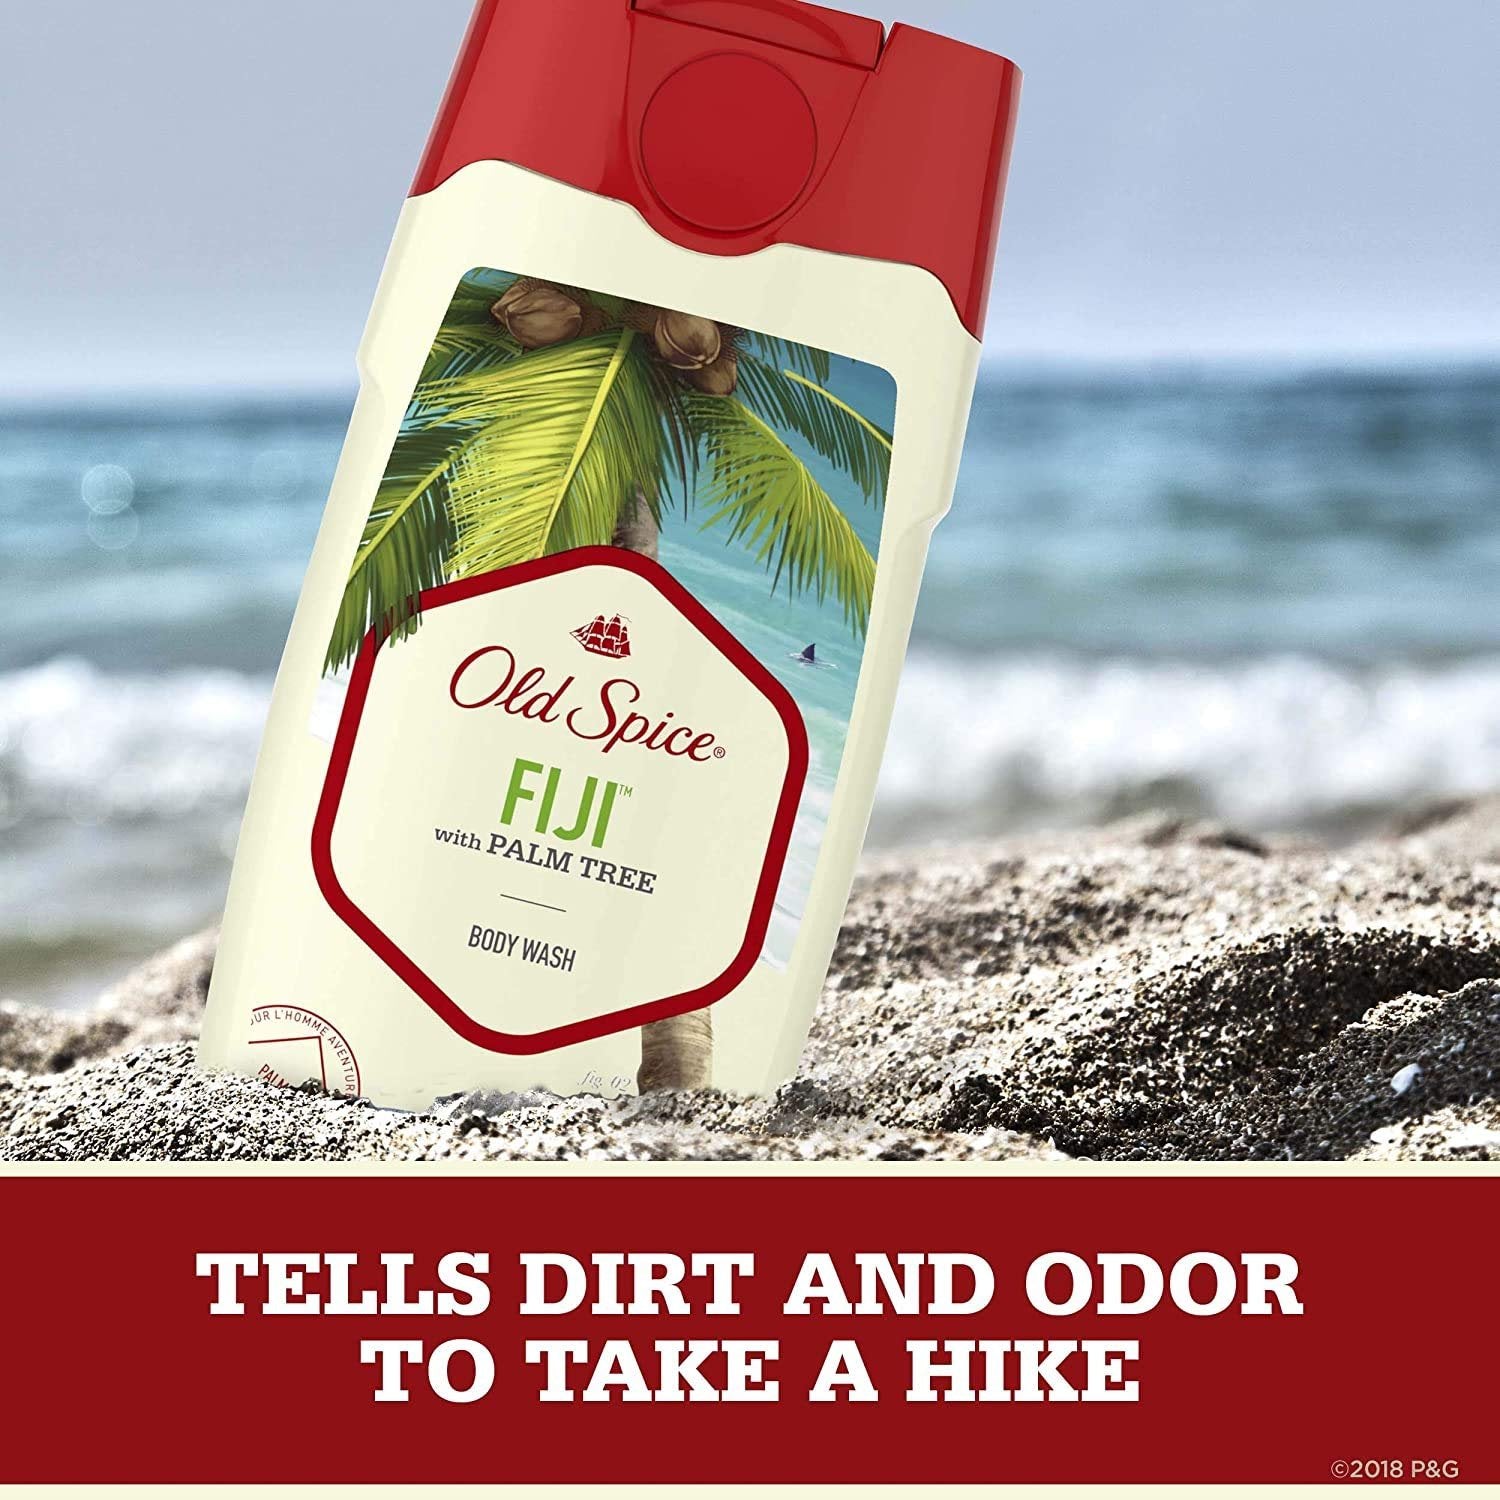 Old Spice Body Wash for Men Fiji With Palm Tree Scent Inspired By Nature, 25 Fl Oz